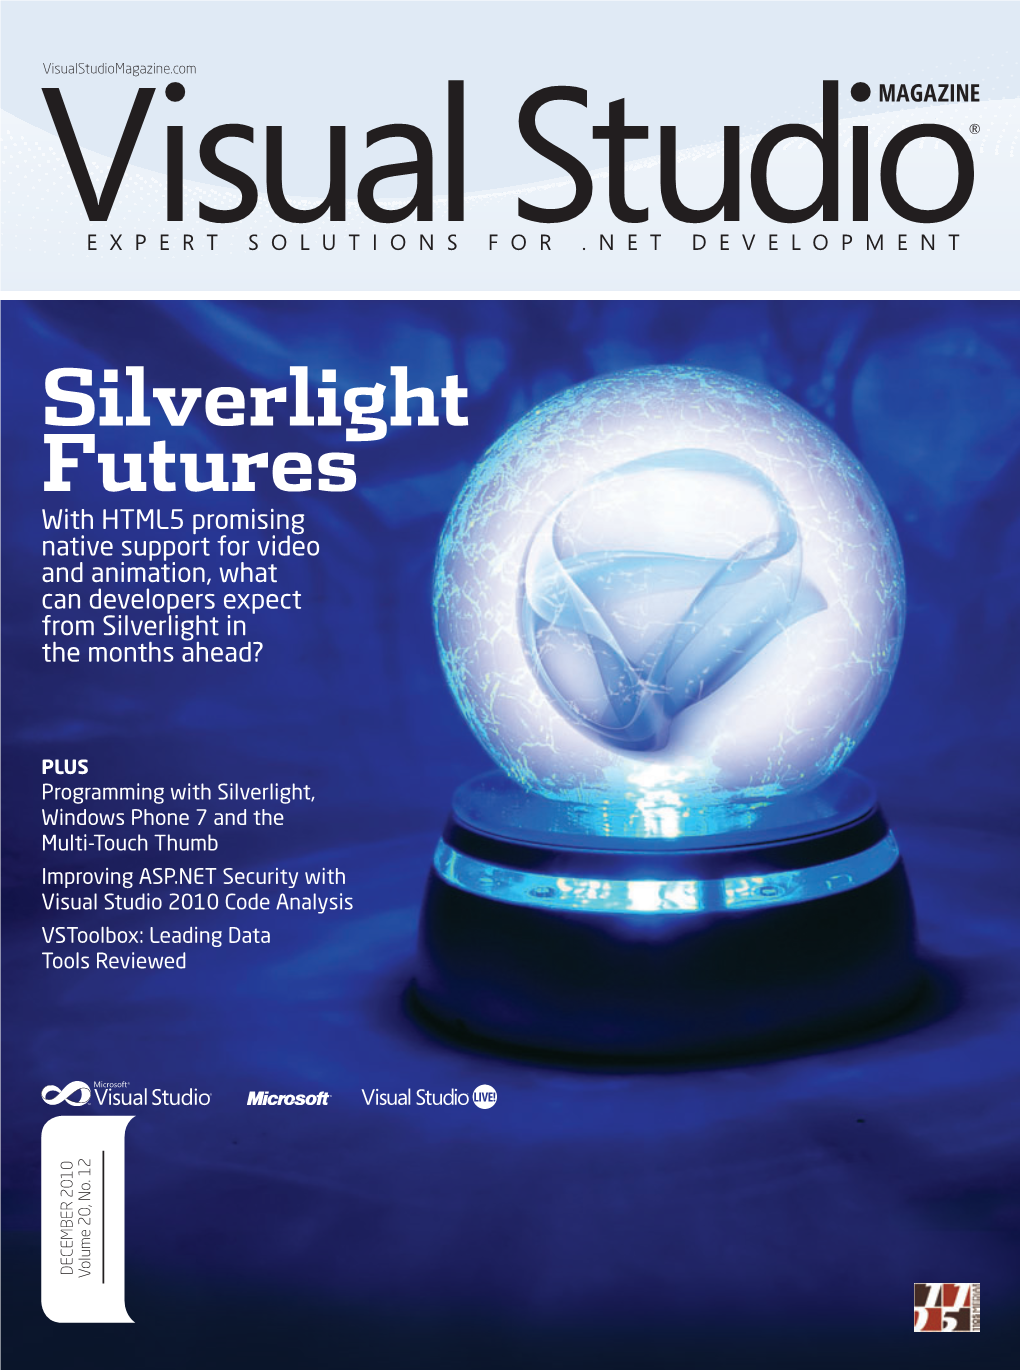 Silverlight Futures with HTML5 Promising Native Support for Video and Animation, What Can Developers Expect from Silverlight in the Months Ahead?